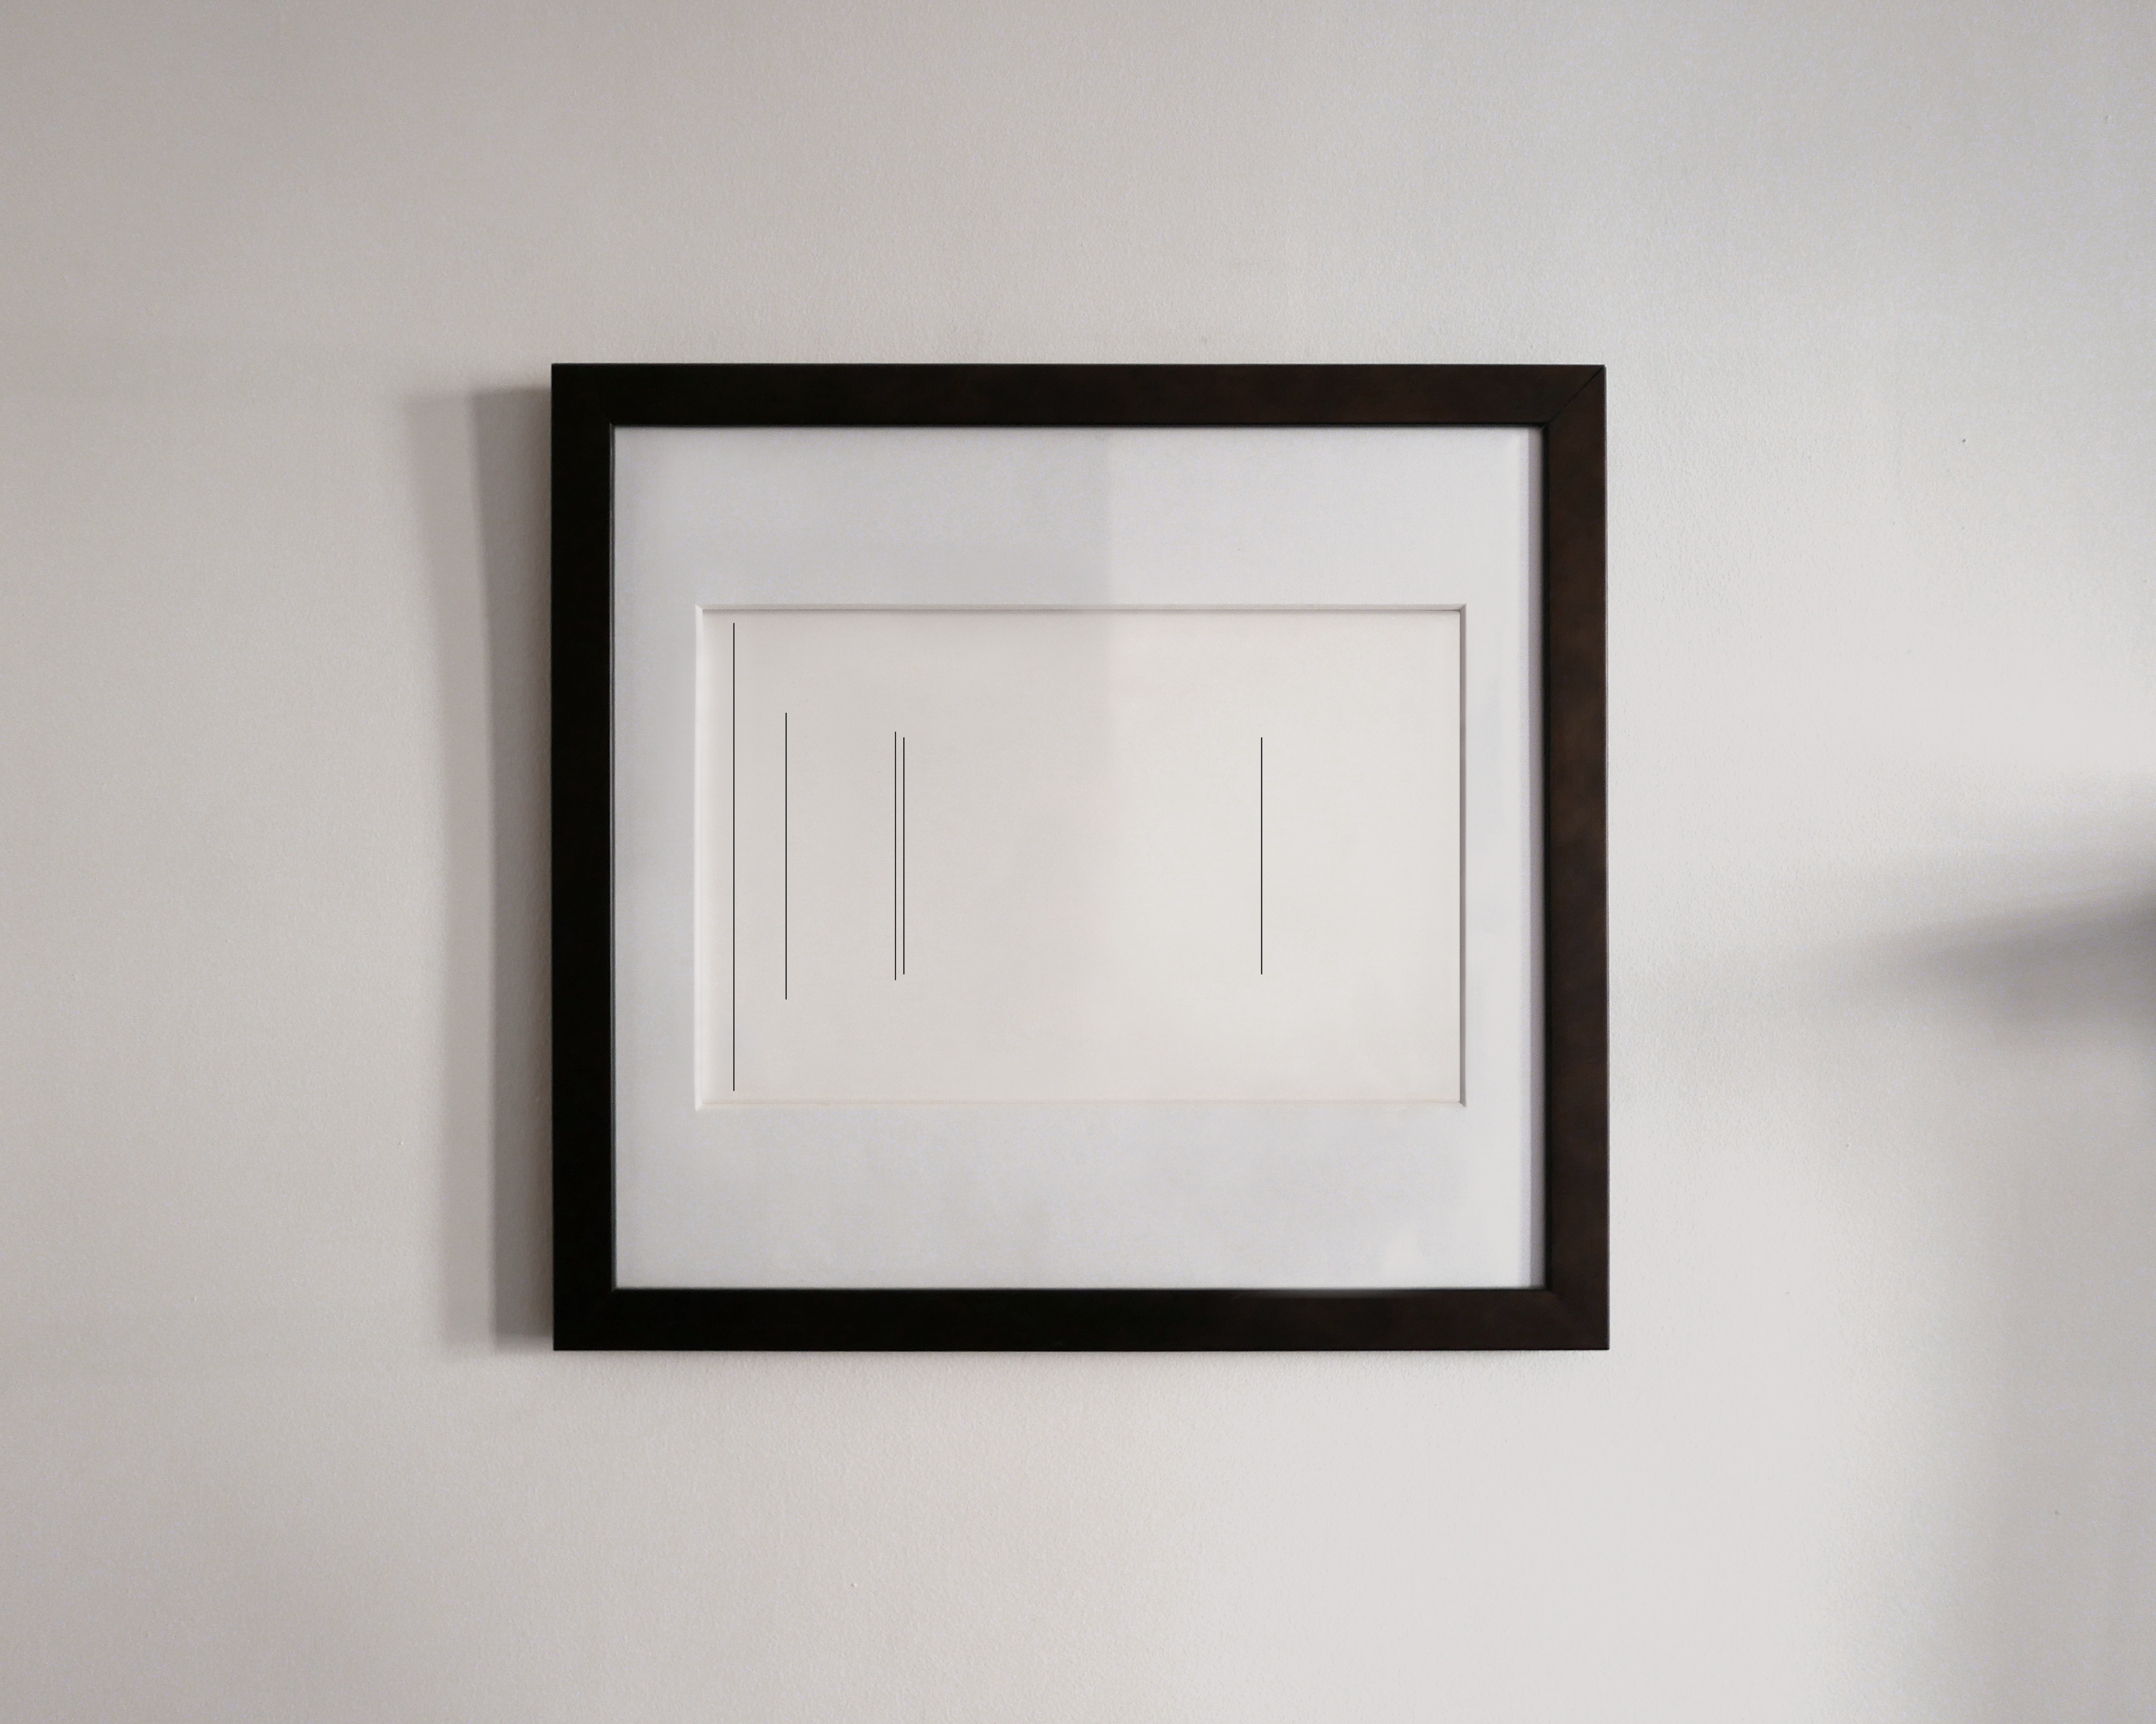 A framed print that makes visible its perspective of the surrounding walls.